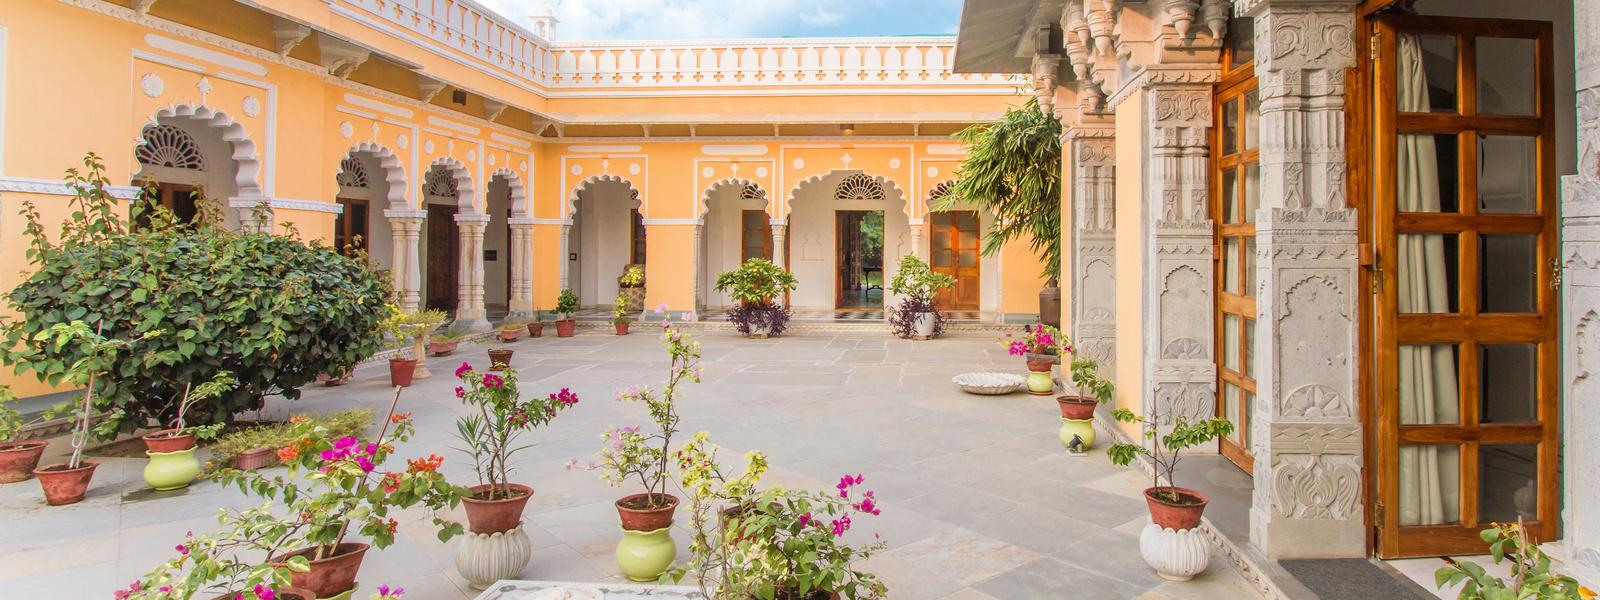 Secluded courtyard at Dev Shree